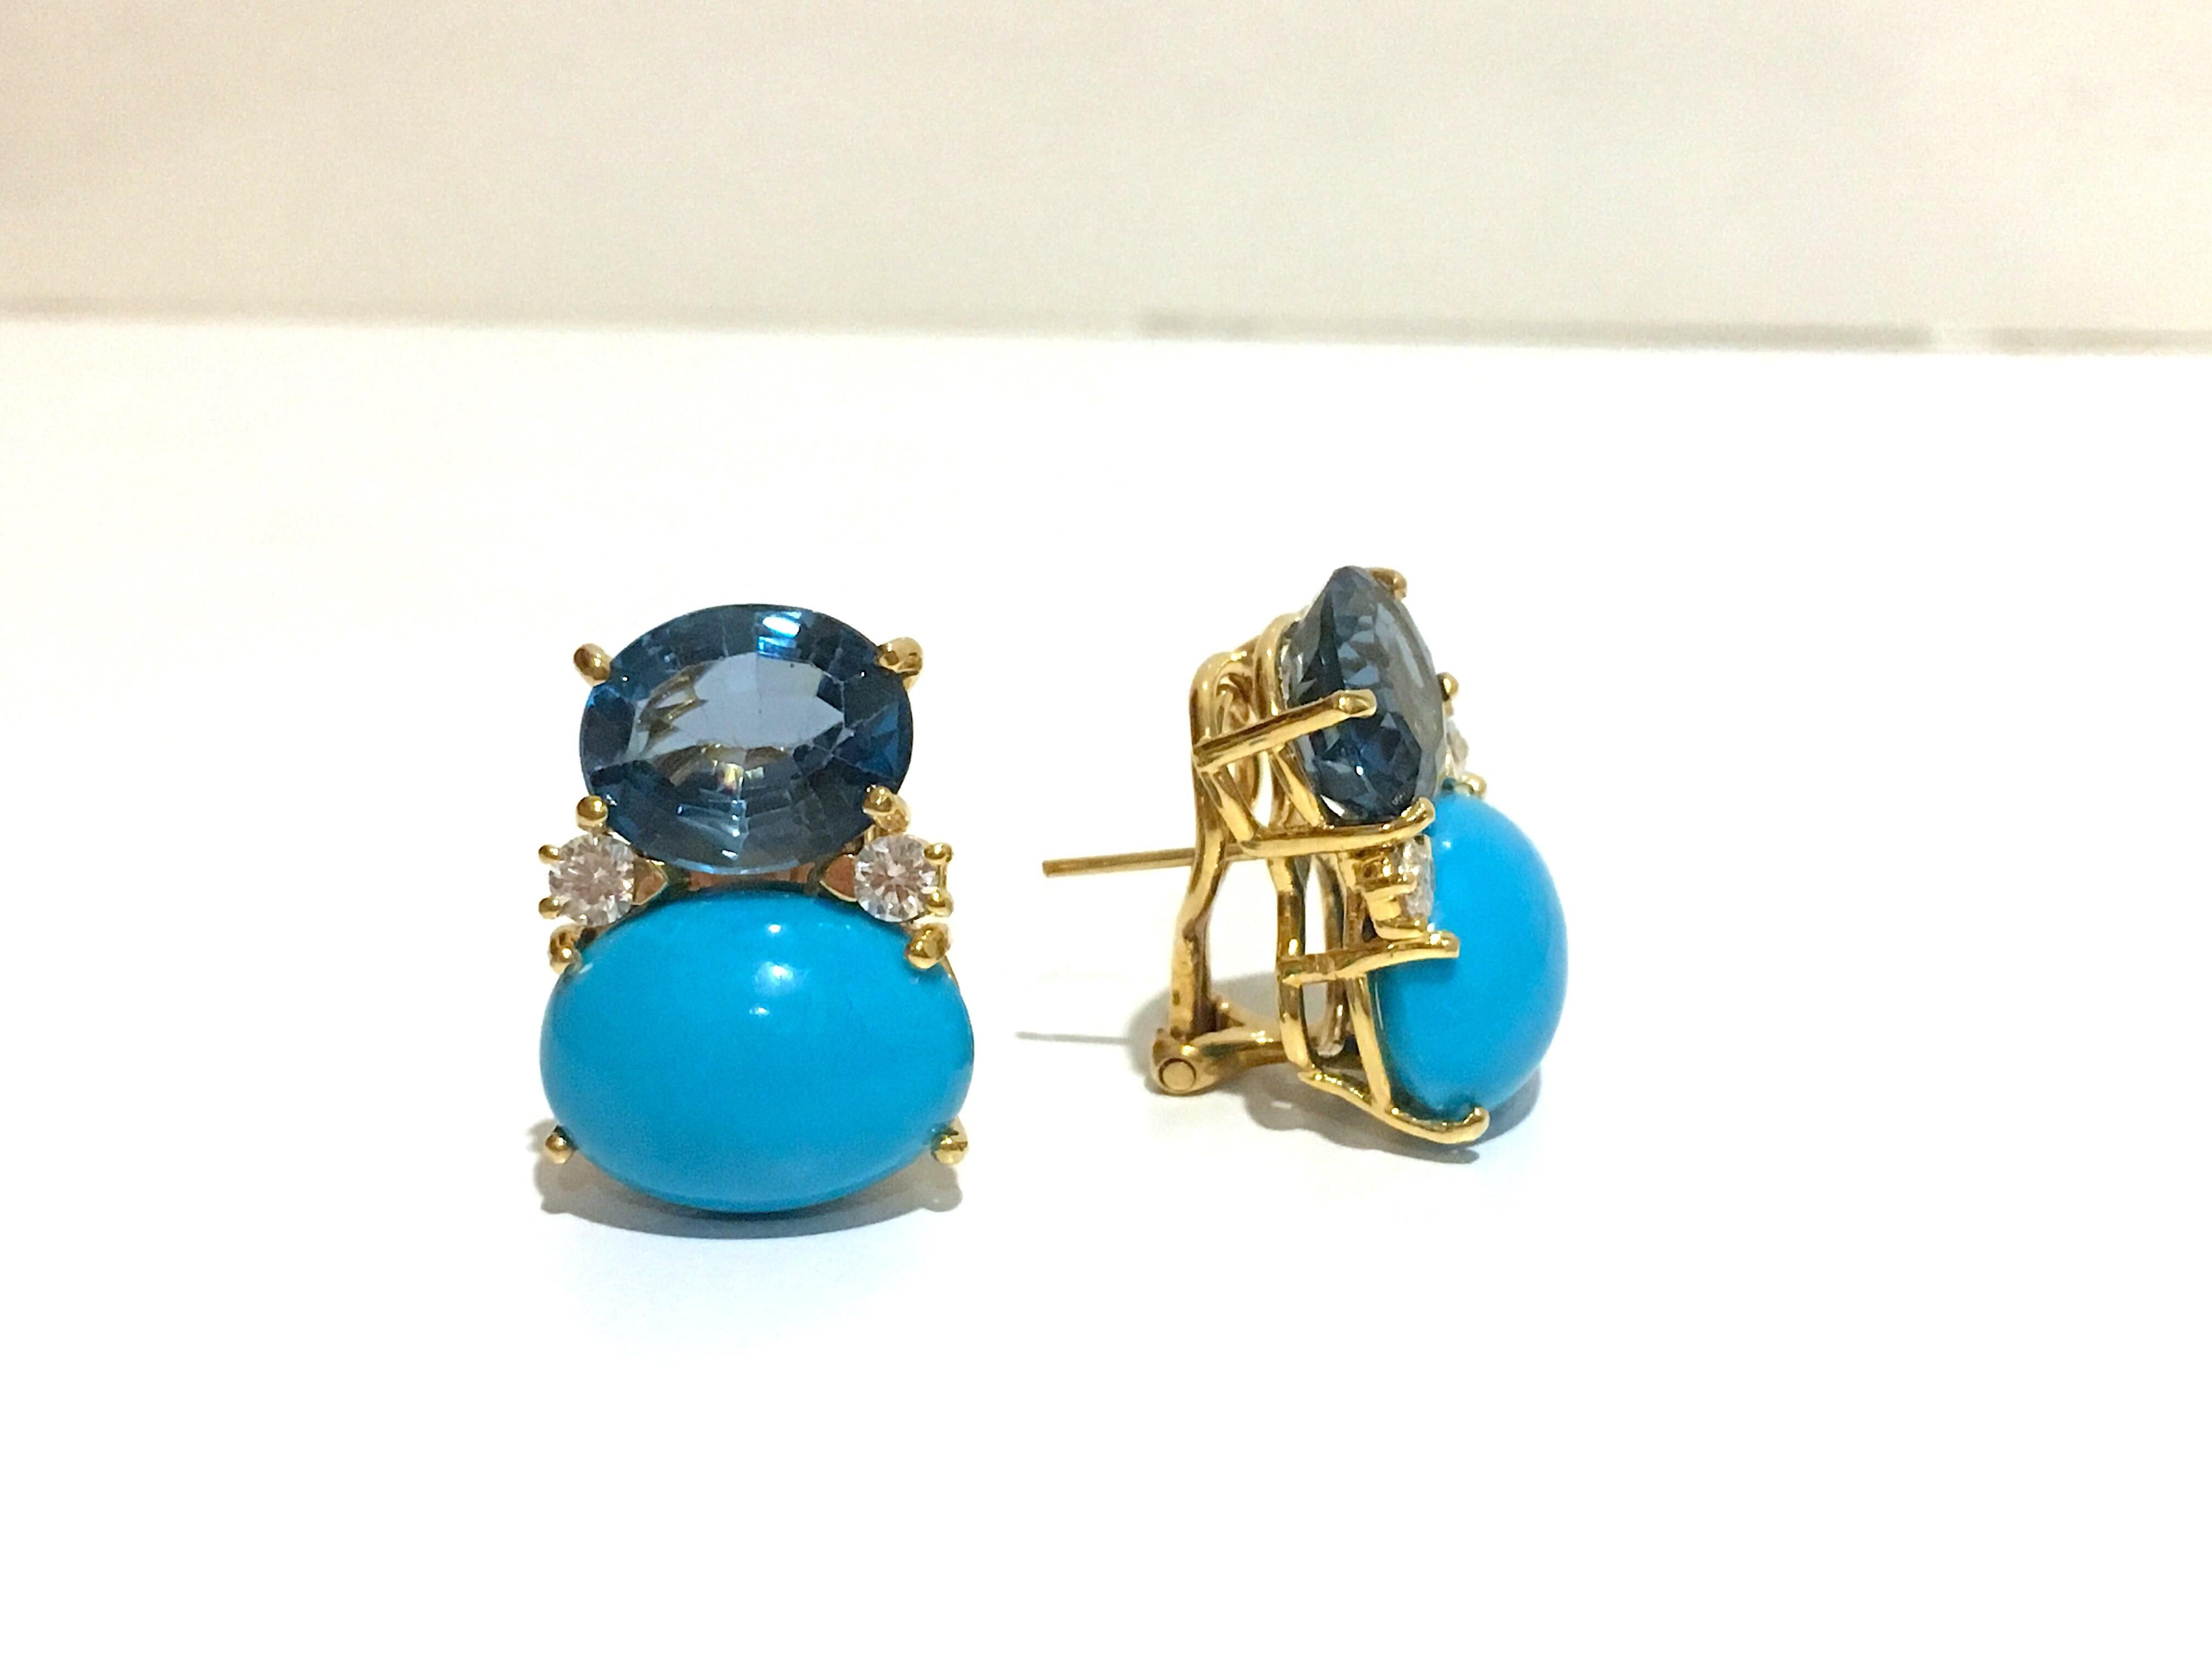 Grande Gum Drop Earrings with Cabochon Turquoise and Diamonds For Sale 5